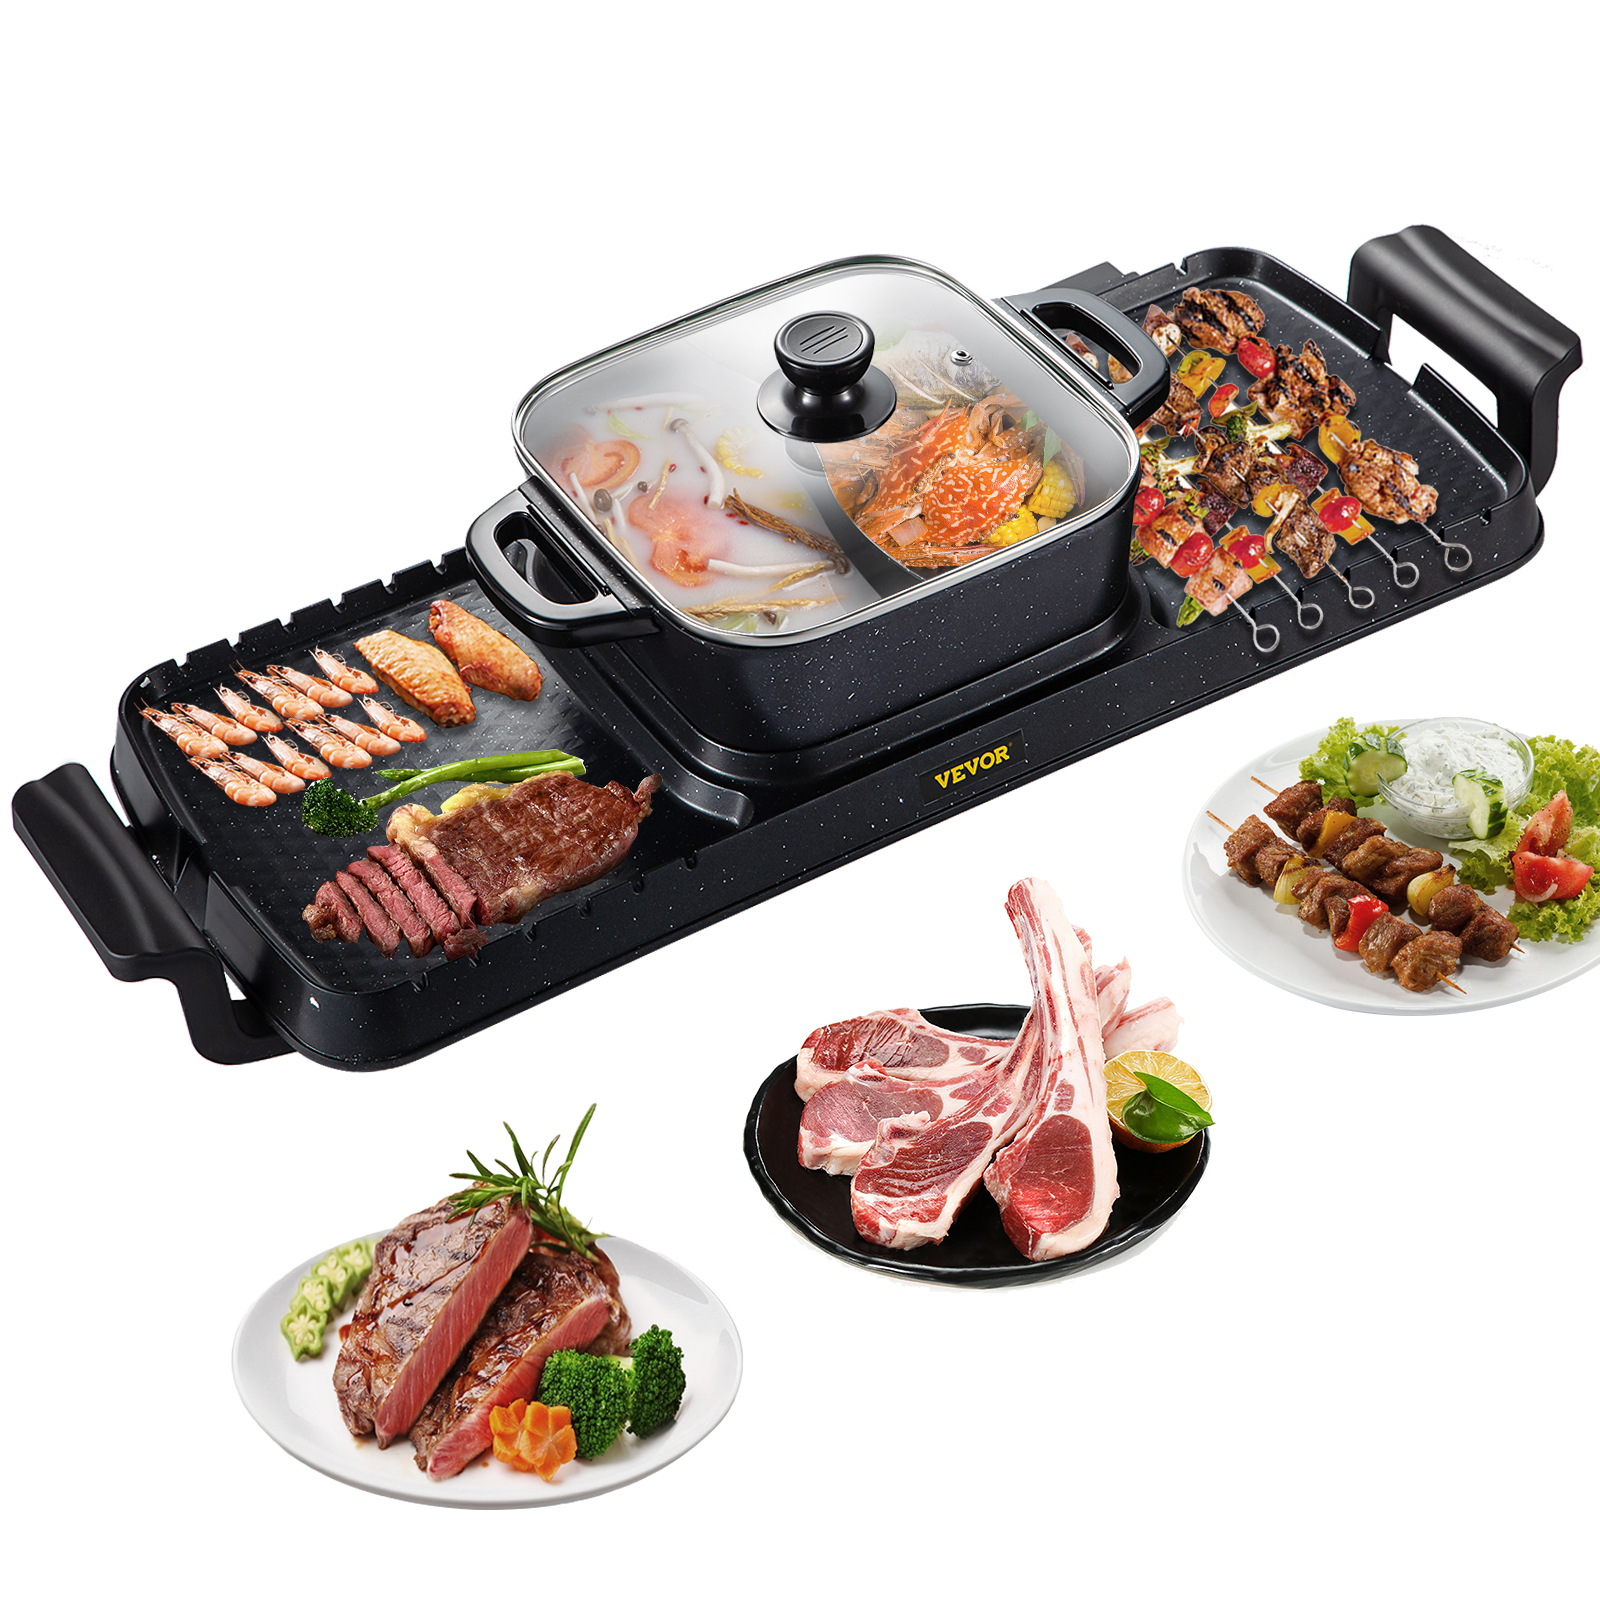 VEVORbrand 2 in 1 Electric Hot Pot and Grill,2400W Smokeless Hot Pot Grill,BBQ Hot Pot, Black - image 1 of 9